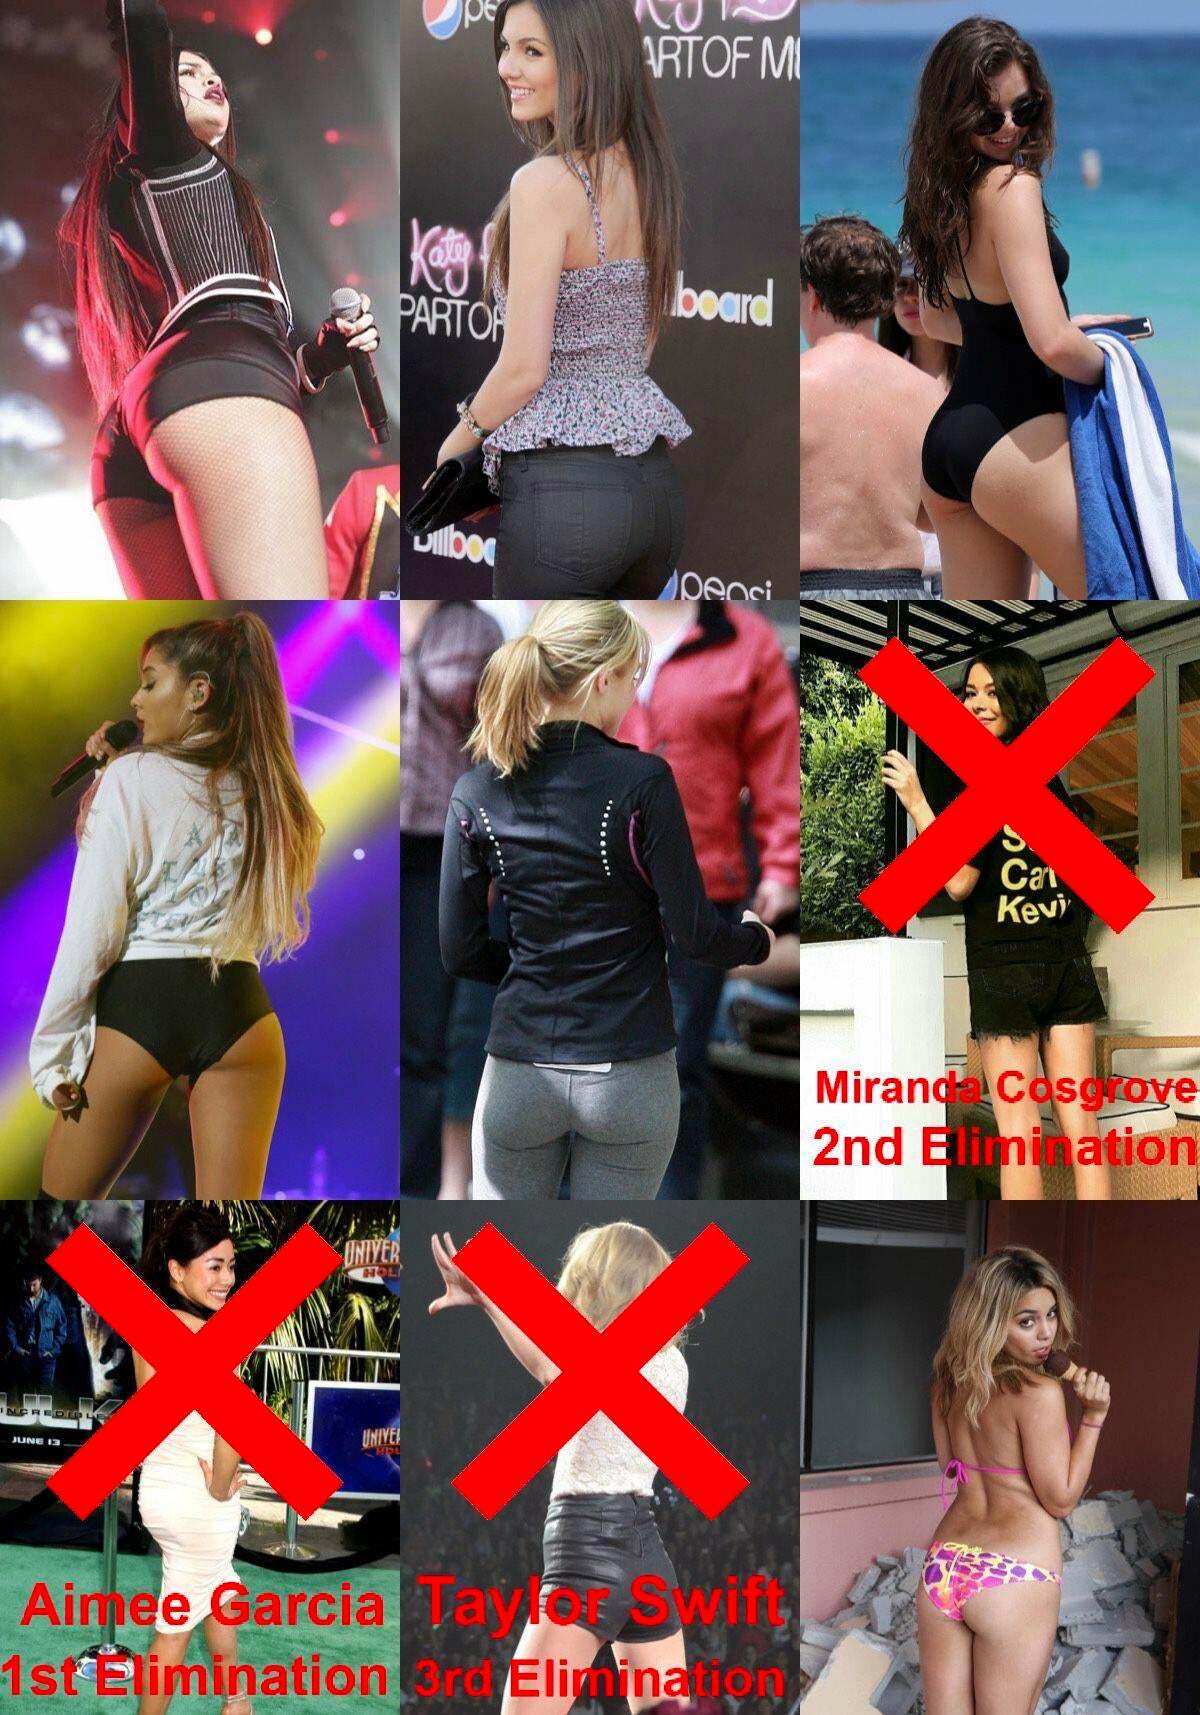 Best Ass Tournament: 4th Elimination. Choose the next girl to be eliminated. Selena Gomez, Victoria Justice, Hailee Steinfeld, Ariana Grande, Kristen Bell, Vanessa Hudgens